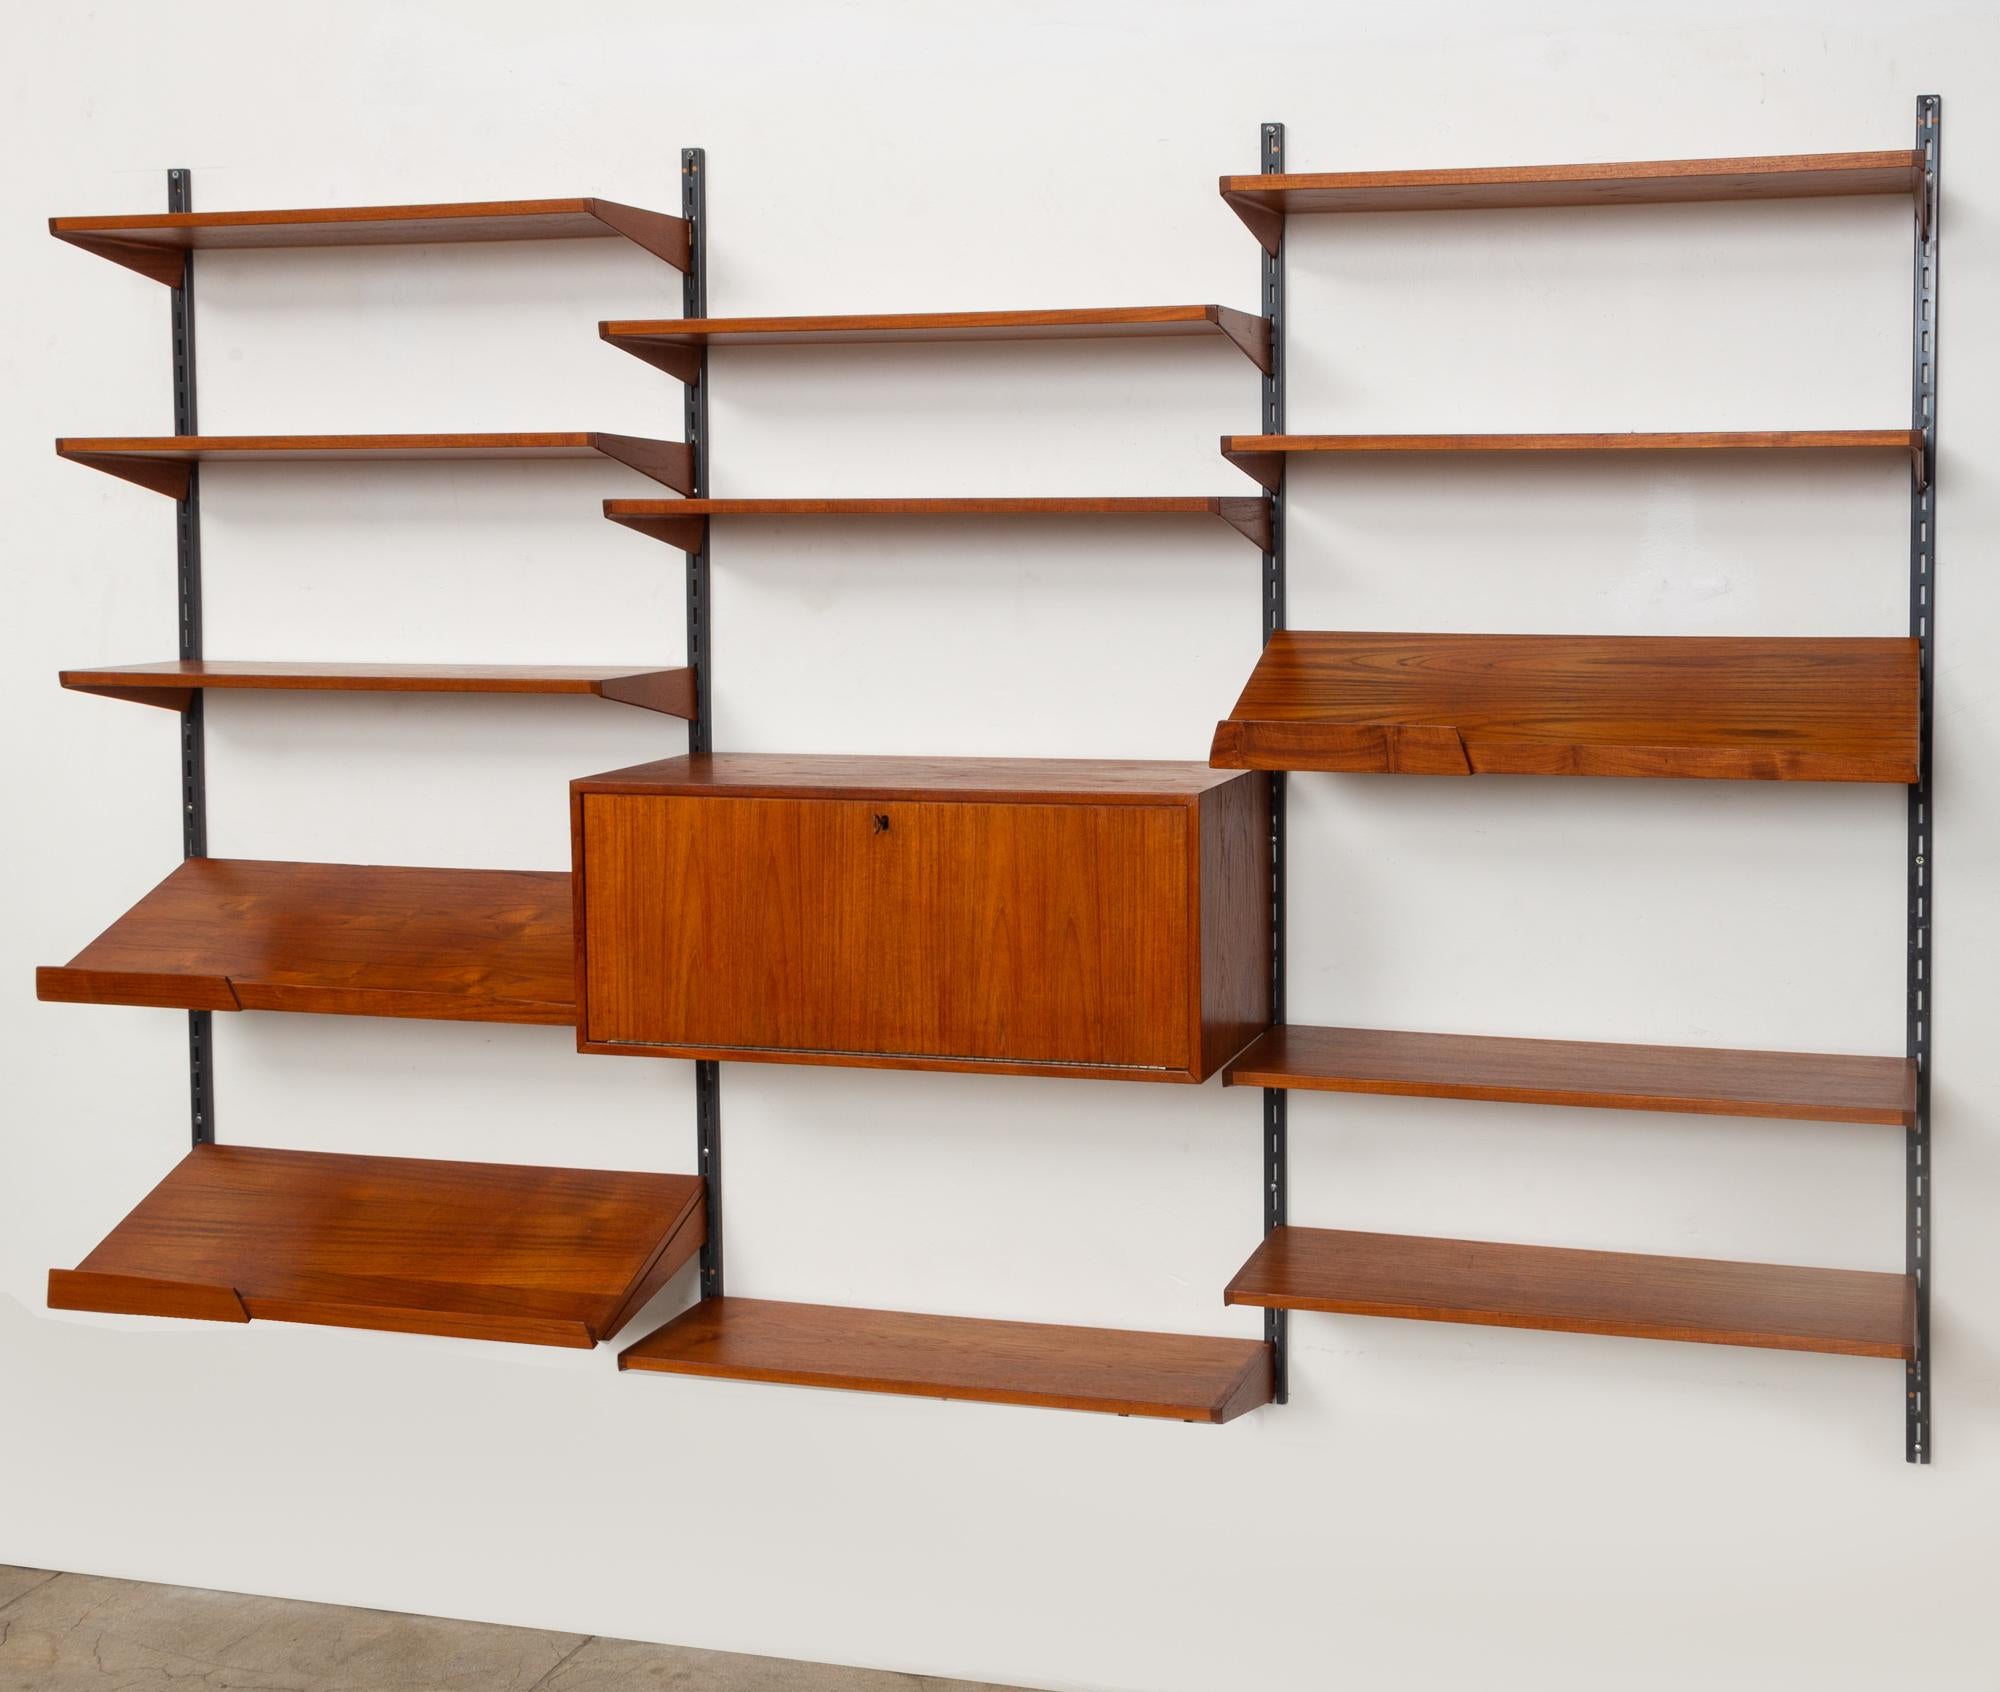 Kai Kristiansen wall unit for FM Mobler, Denmark, circa 1960s. This modular shelving system features three bays with steel bars and ten teak adjustable shelves. Also included are three angled magazine shelves and a lockable cabinet, featuring a